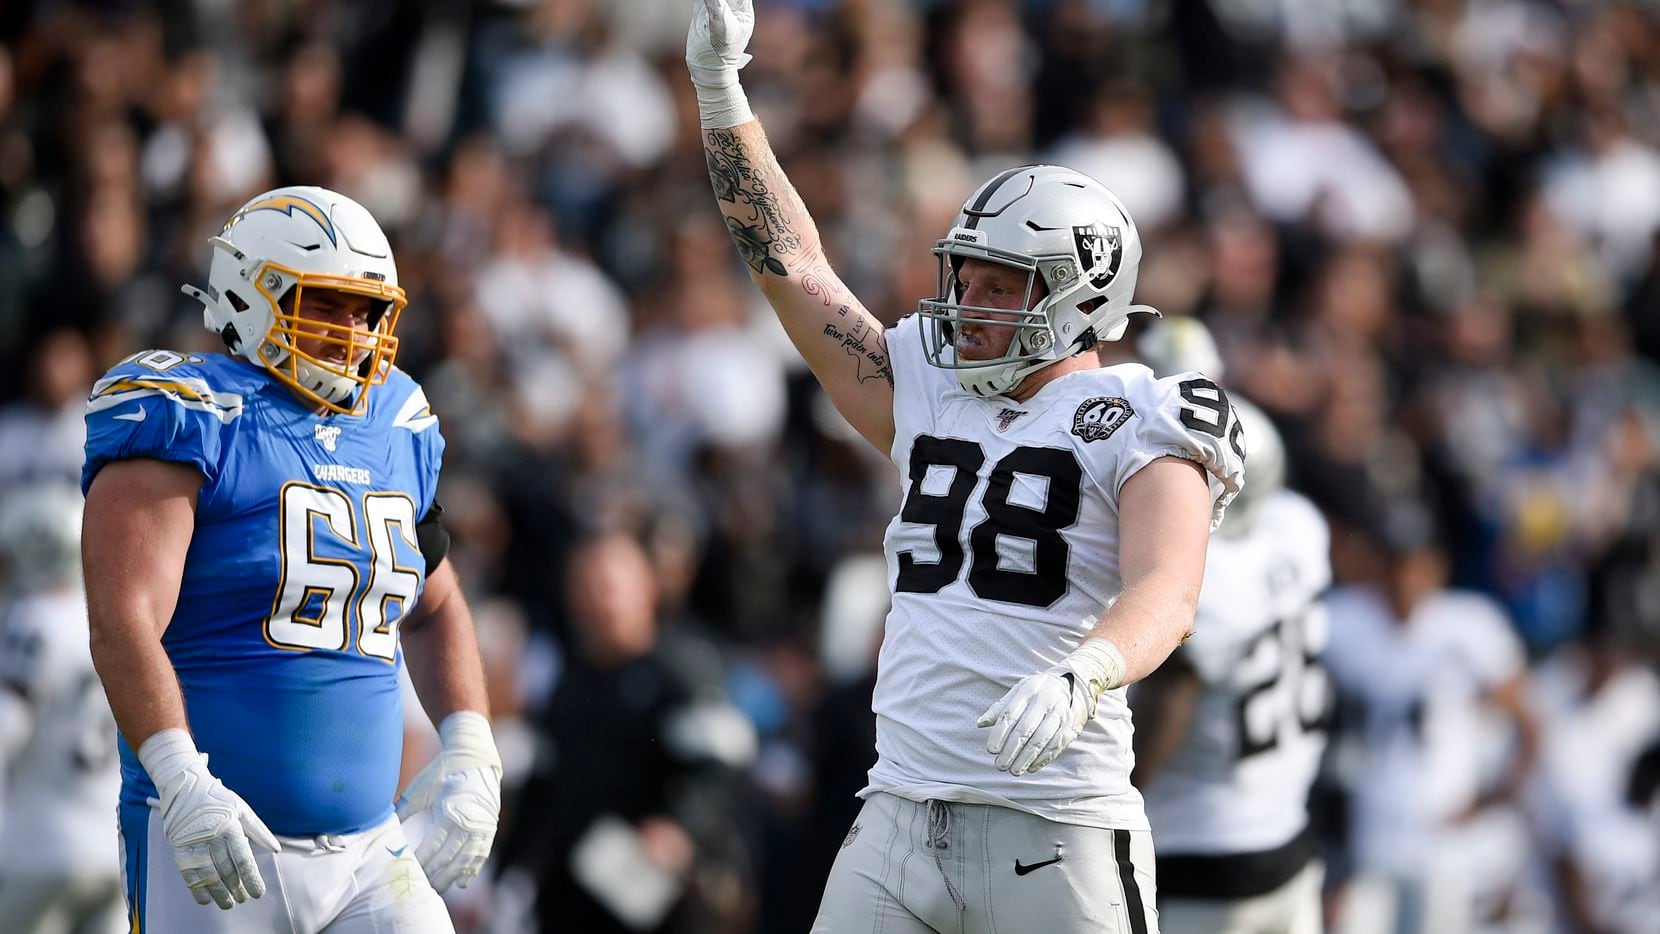 FILE - Raiders defensive end Maxx Crosby is pictured during the first half of a game against the Chargers in Carson, Calif., on Sunday, Dec. 22, 2019. (AP Photo/Kelvin Kuo)